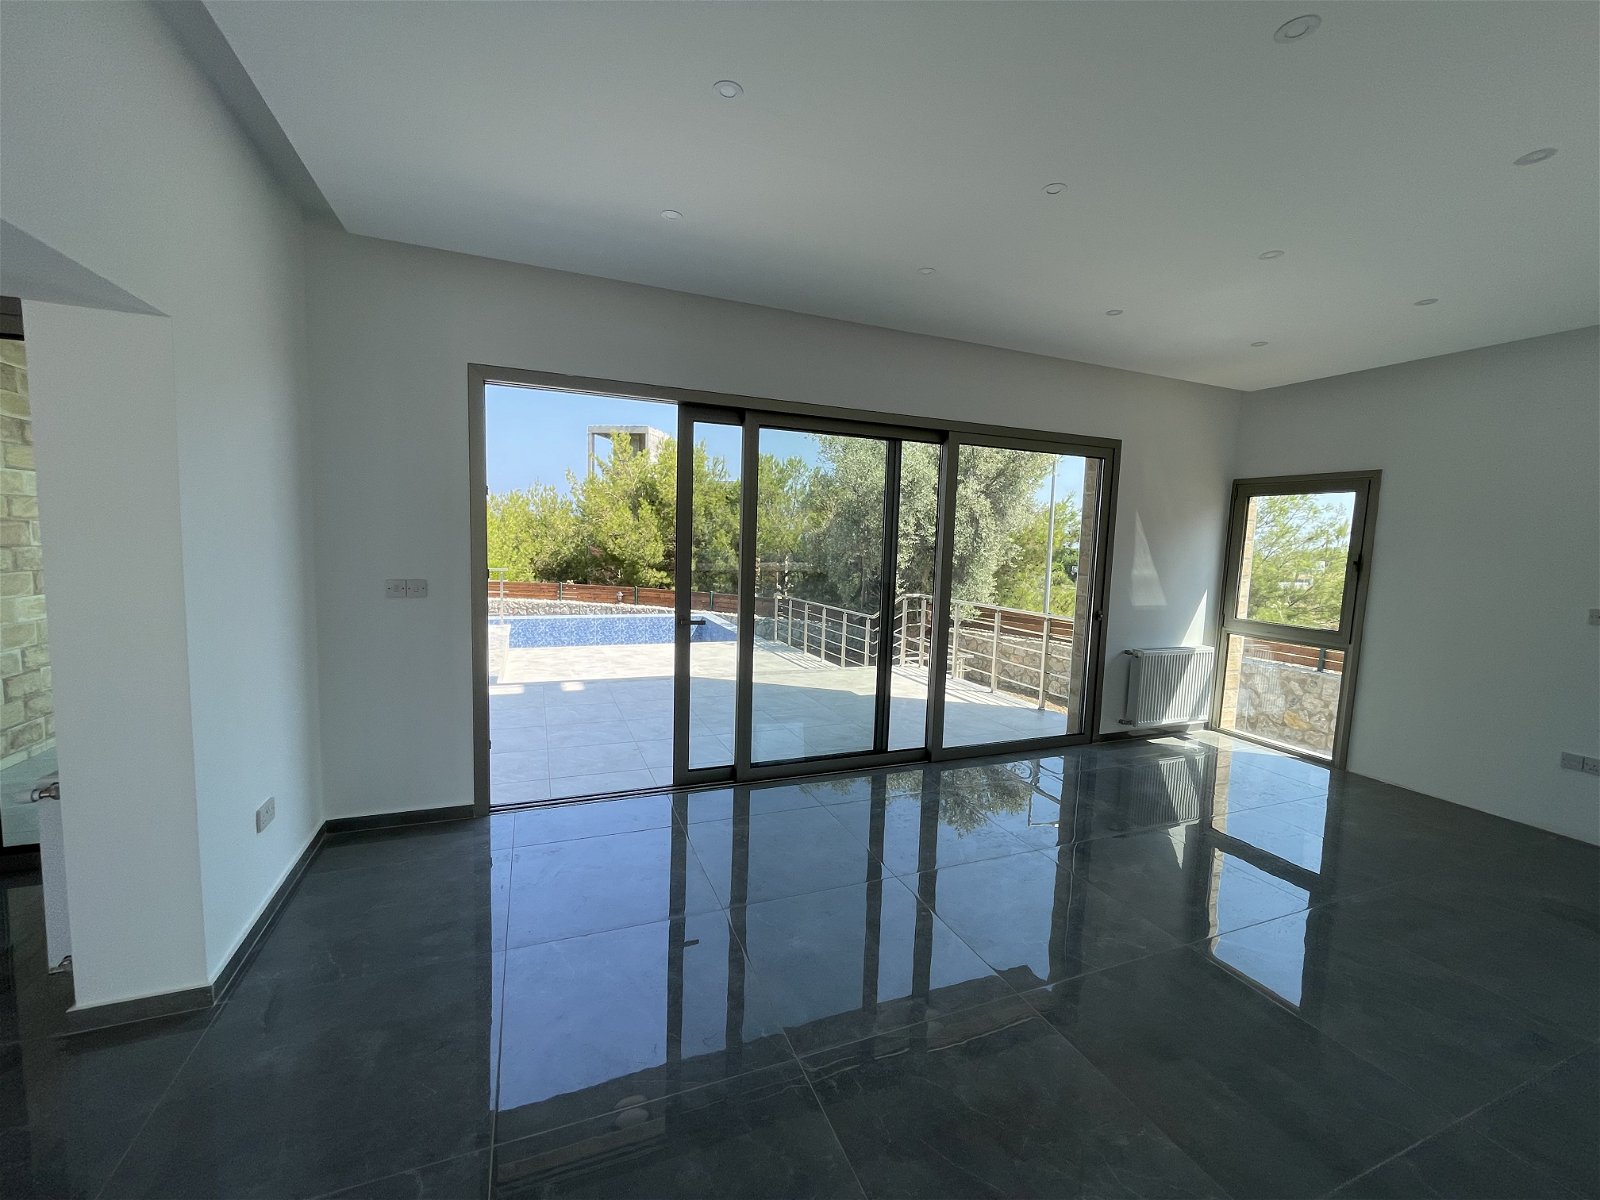 Stunning 3+1 Modern Villa with Sea and Mountain Views in Catalkoy, Kyrenia-12c6390d-1578-4e6b-a98d-5716f82cb77d